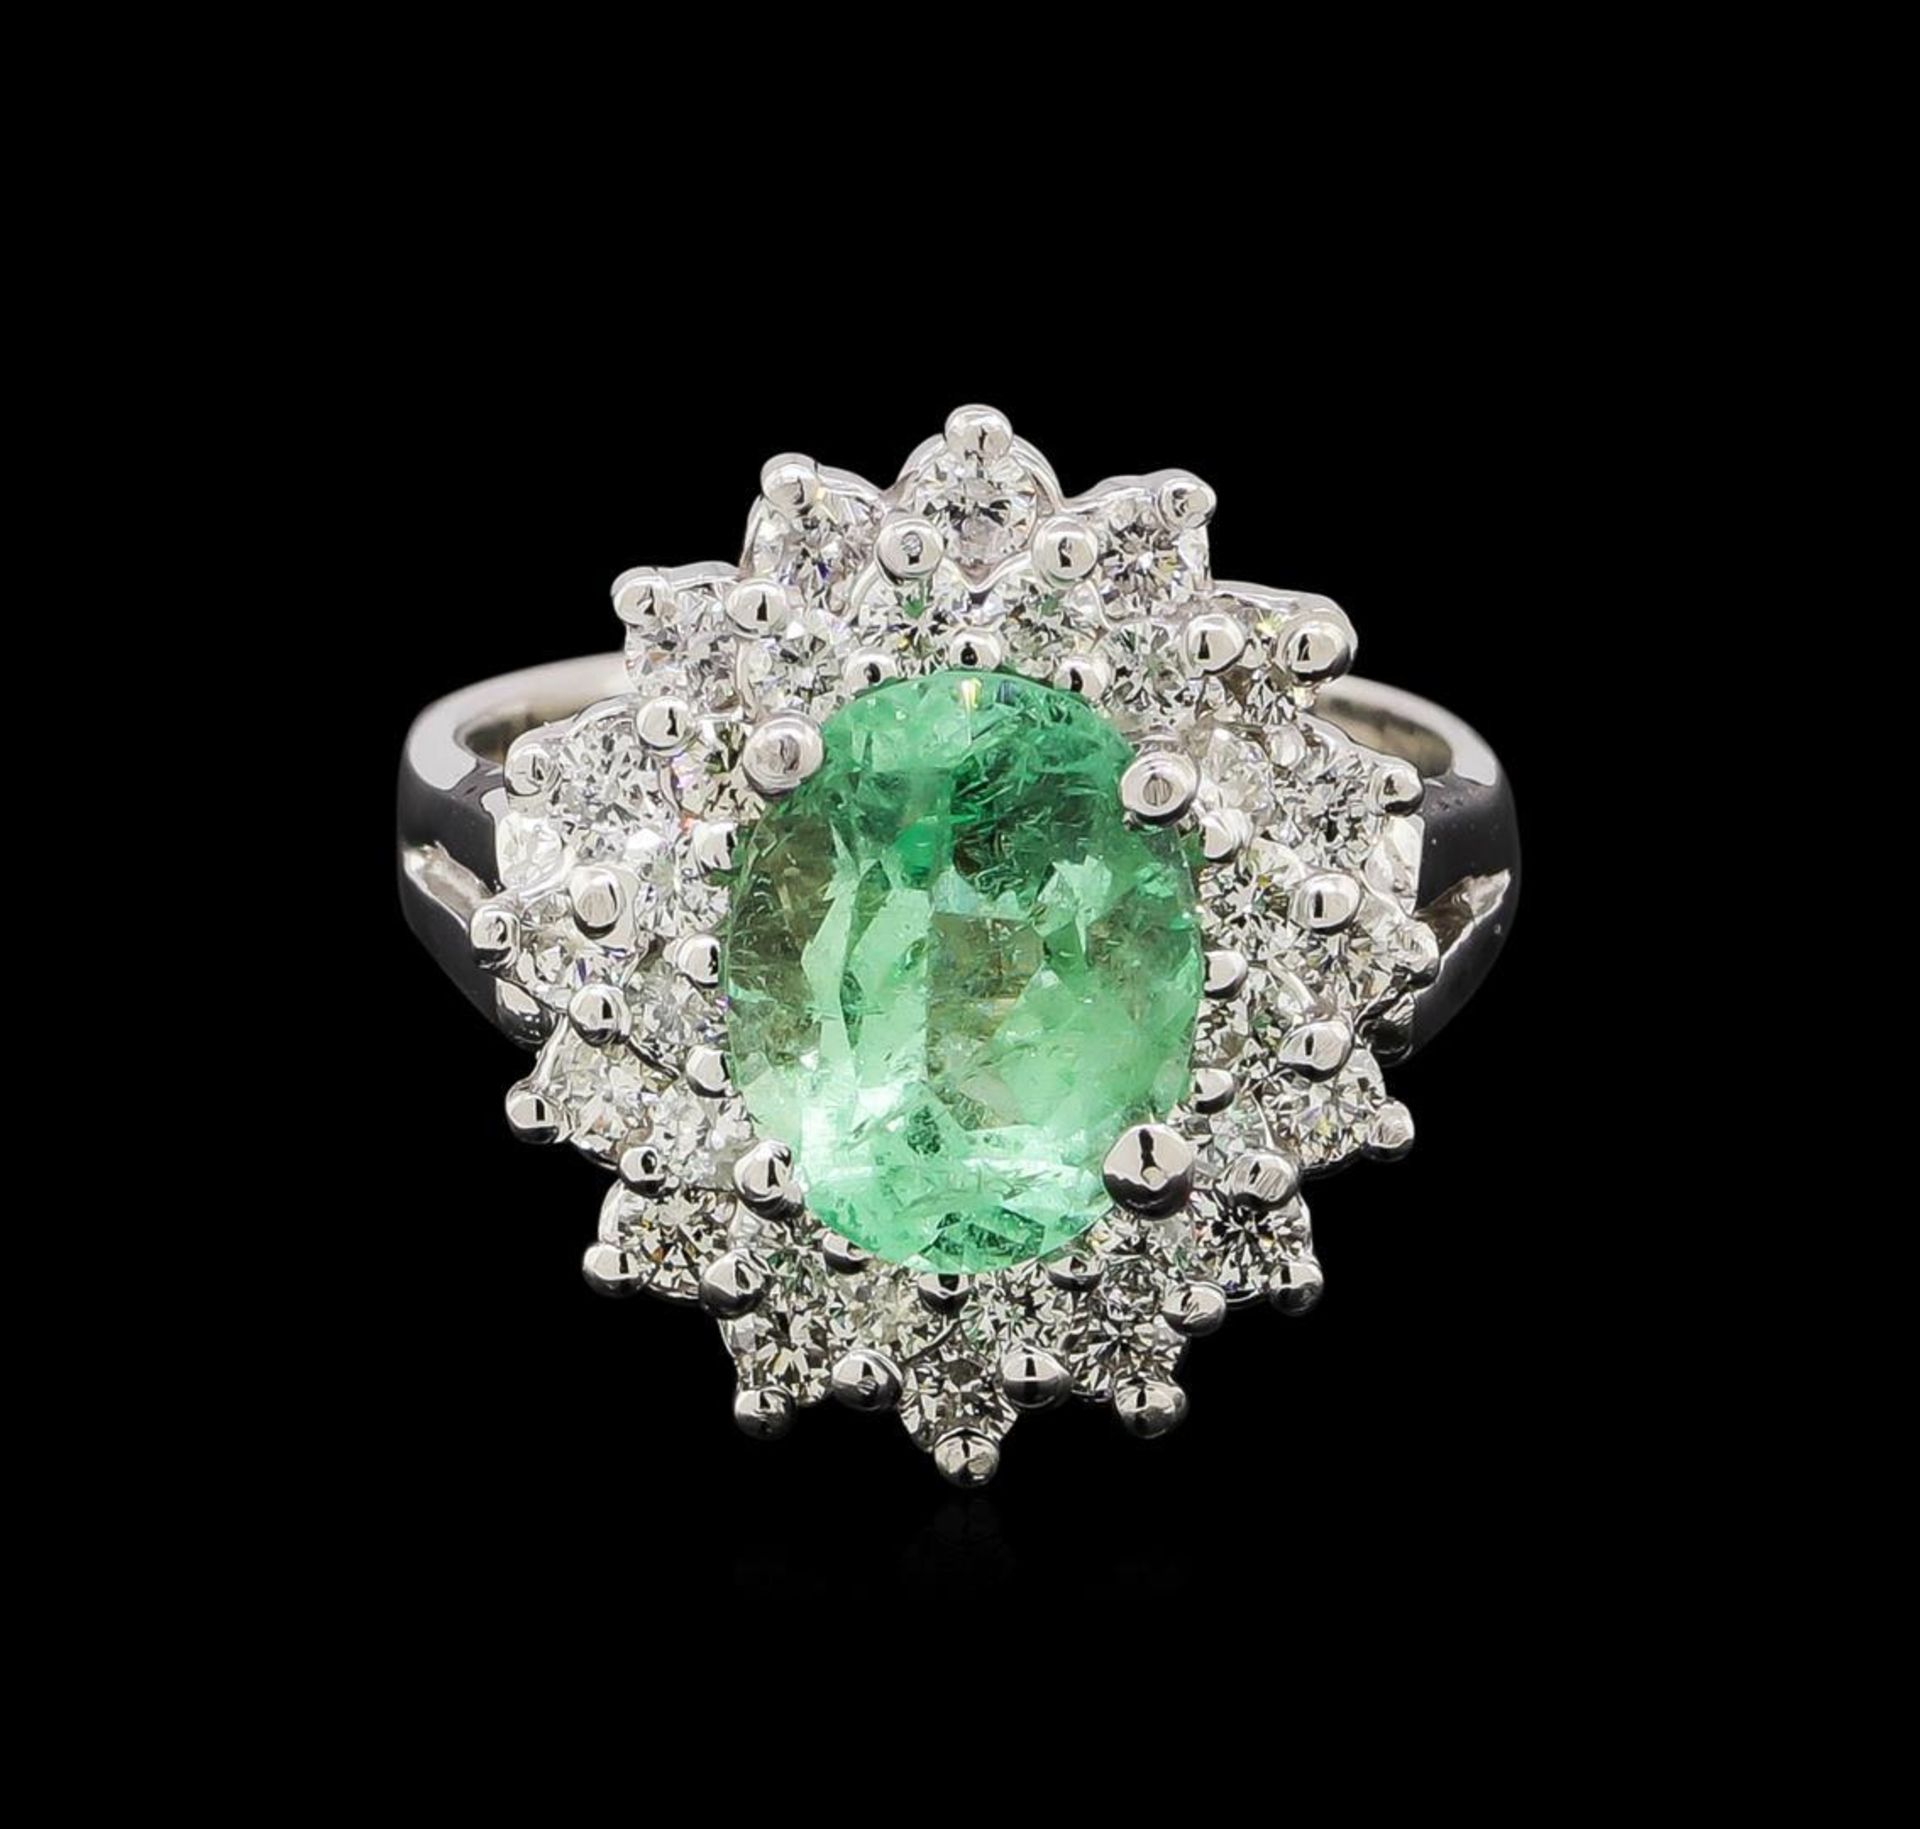 2.26 ctw Emerald and Diamond Ring - 14KT White Gold - Image 2 of 5